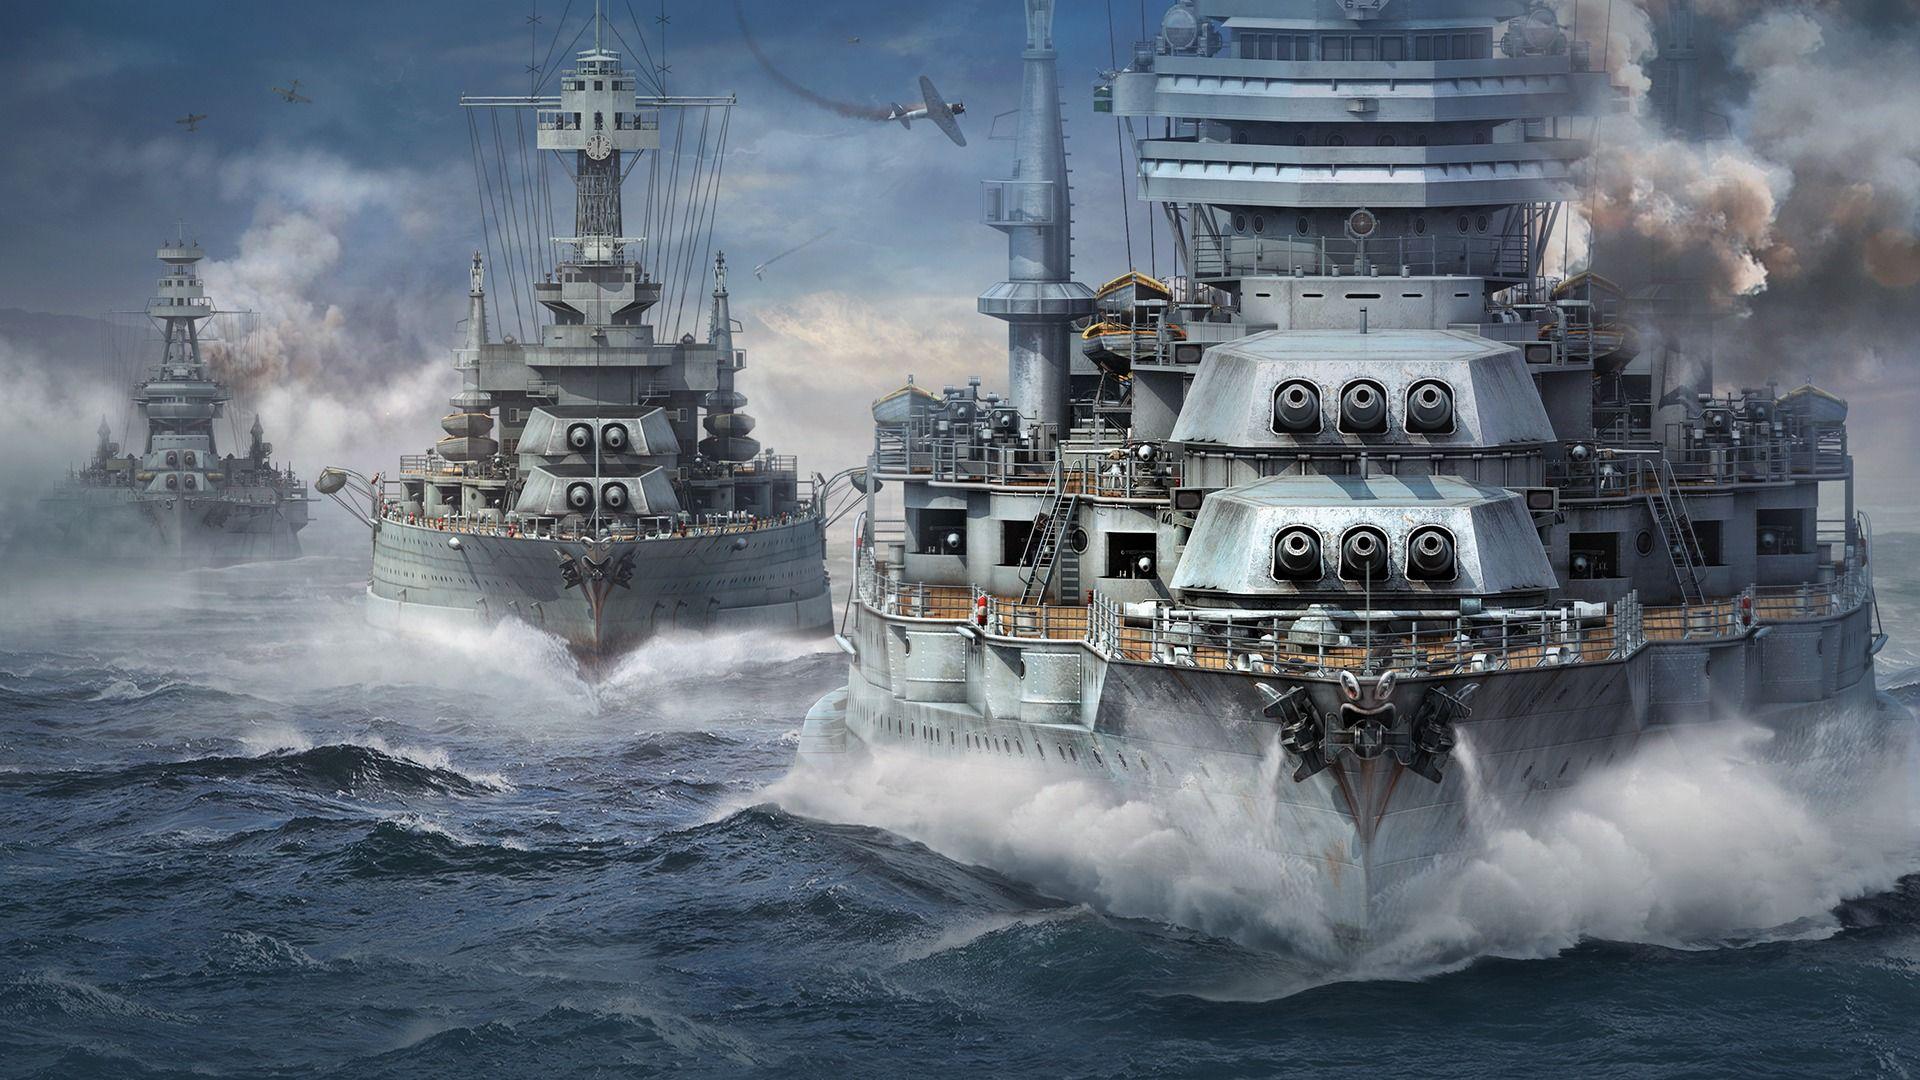 World Of Warships Wallpaper, High Quality Image of World Of